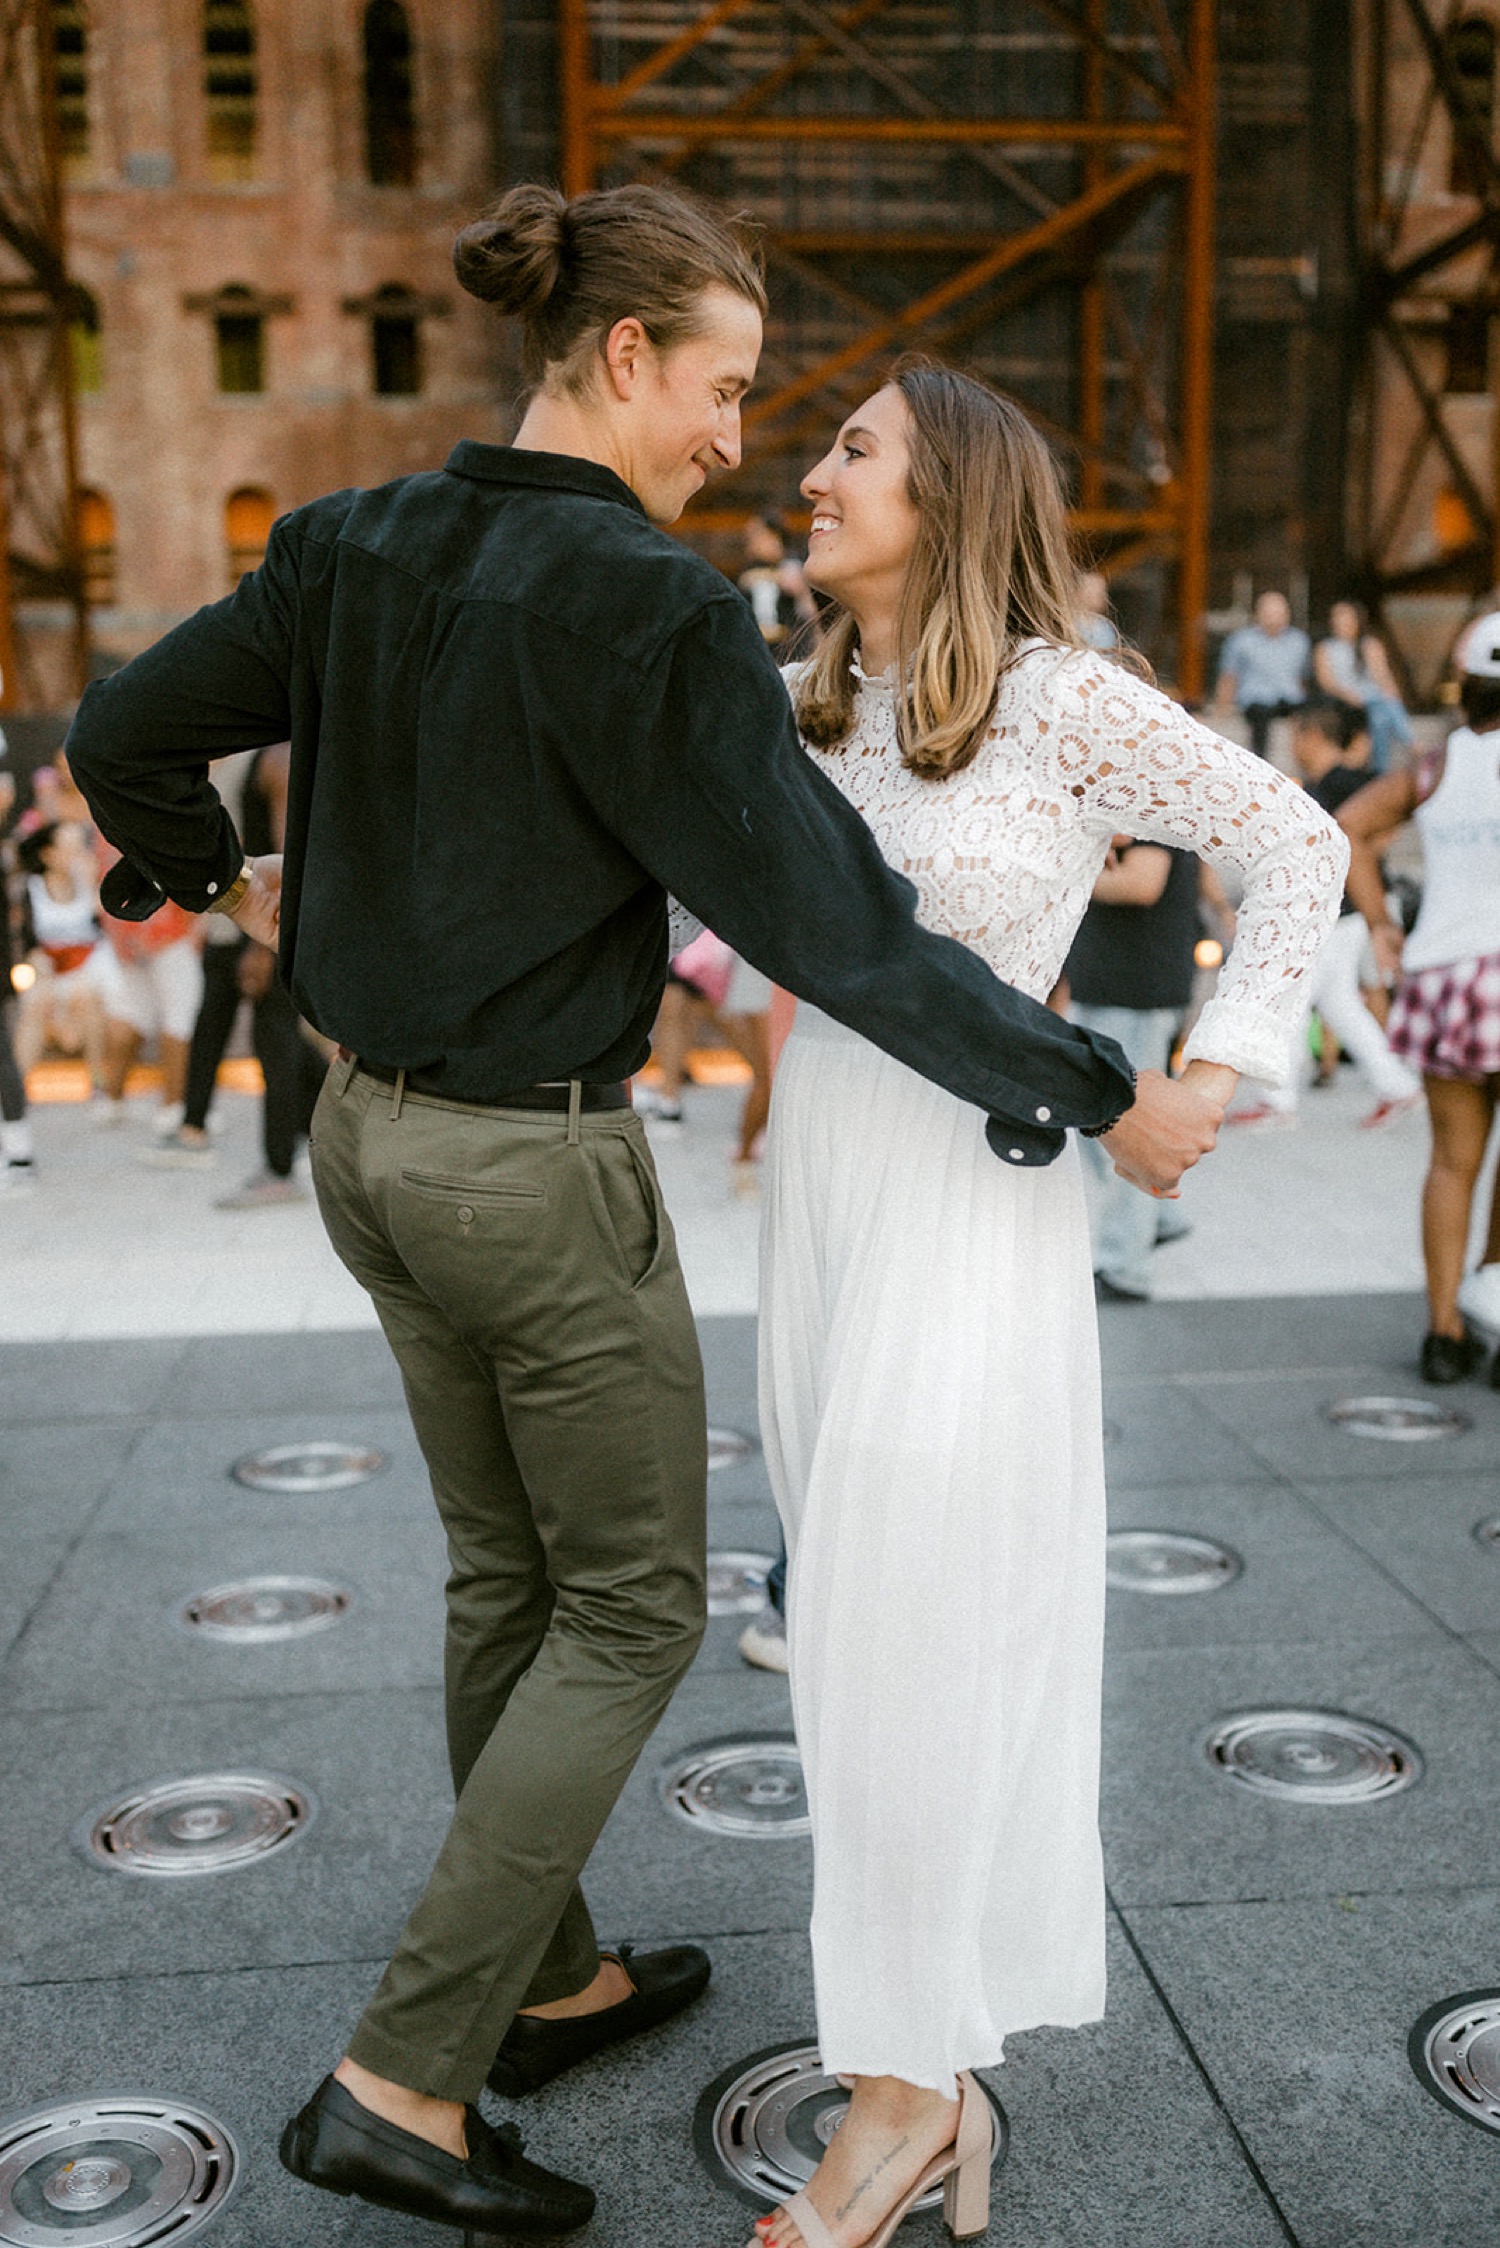 couple dancing in city square